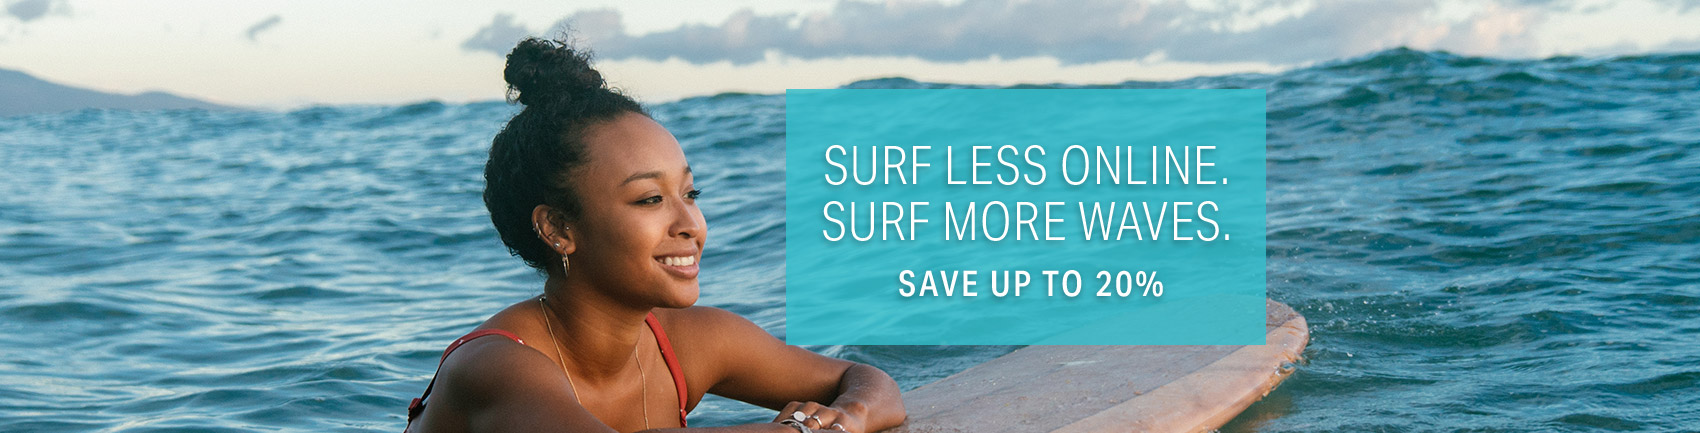 Surf less online. Surf more waves. Save up to 20%.